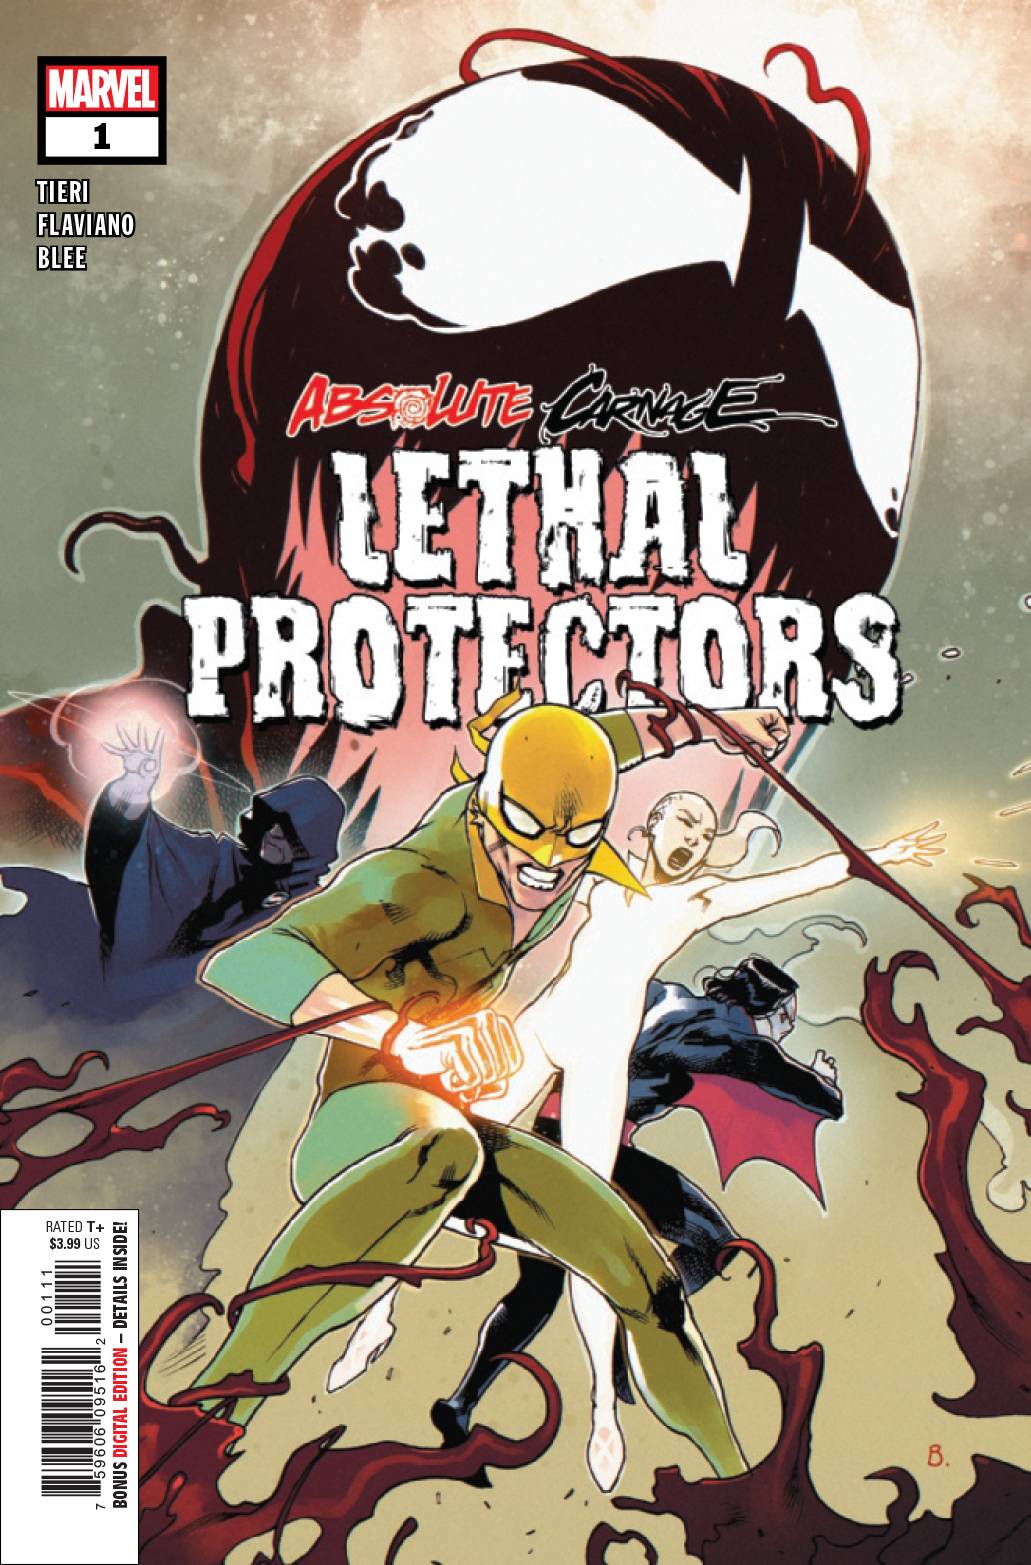 Absolute Carnage Lethal Protectors #1 (Of 3)